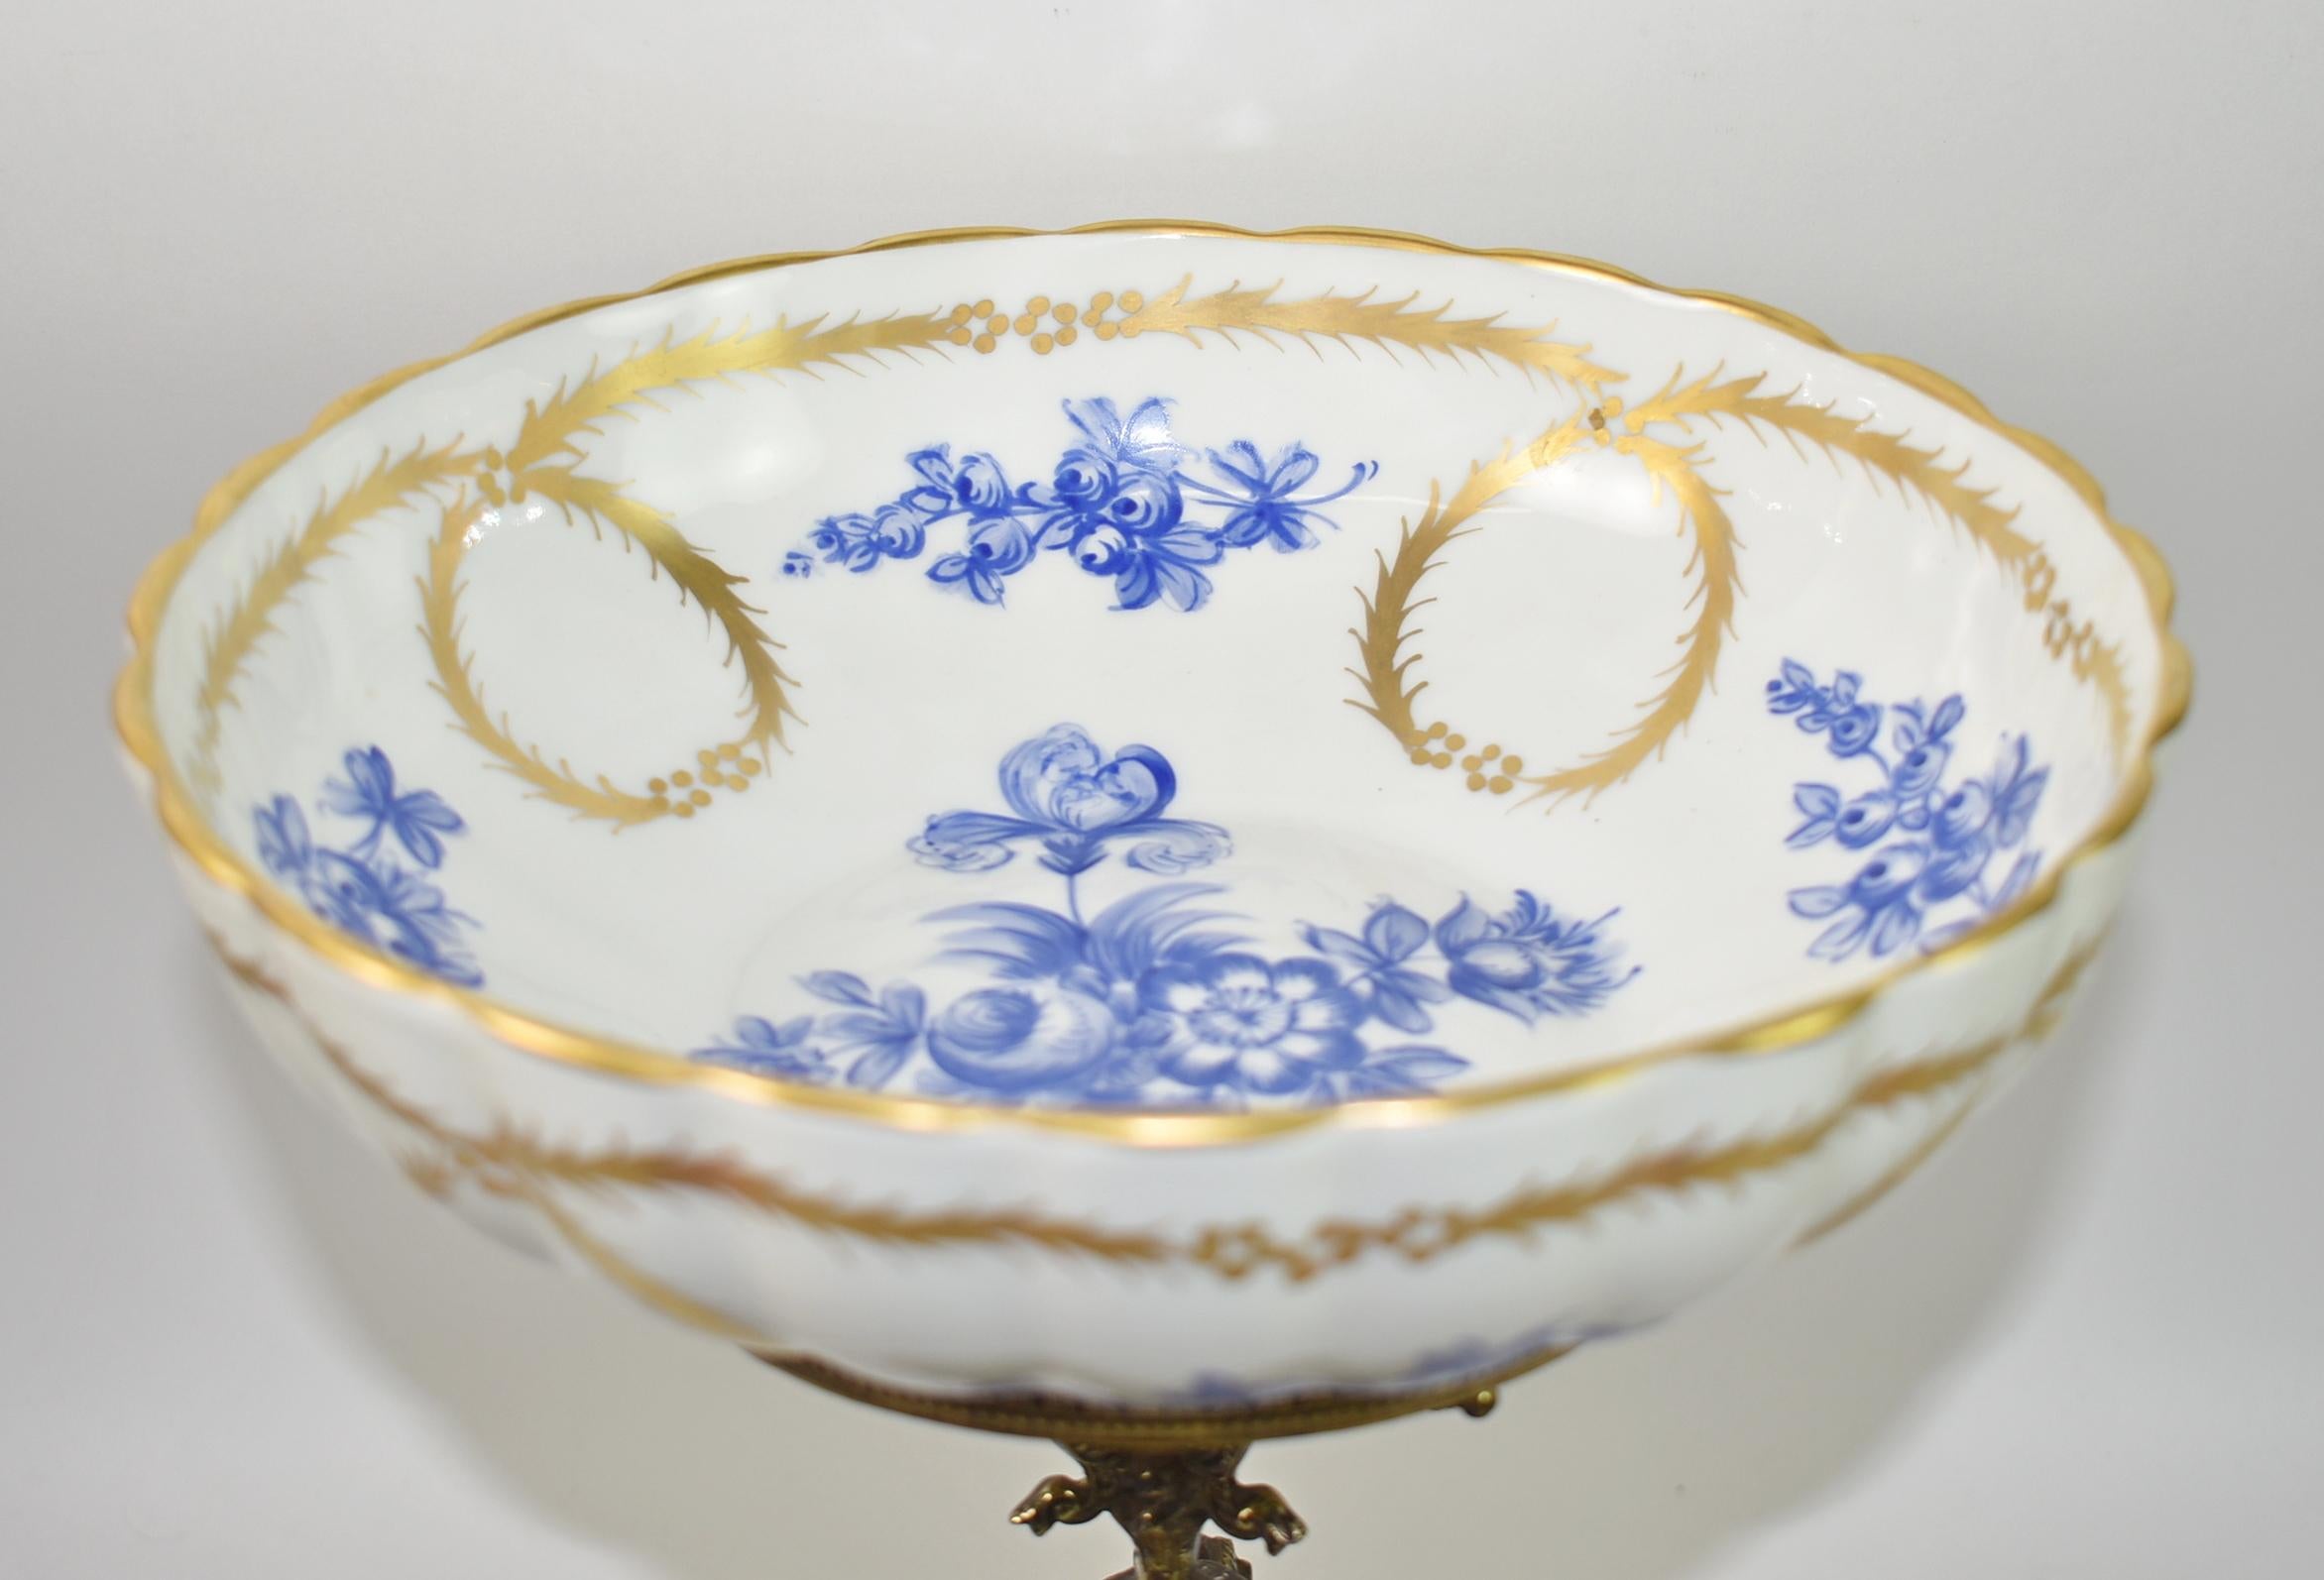 Tazza Brass Center Pedestal with Decorative Meissen Bowl. circa late 19th century. Meissen Porcelain bowl is decorative with blue flowers with gold swags and wreaths. Marked with hand painted crossed swords, ALLCO, and stamped France. The Tazza